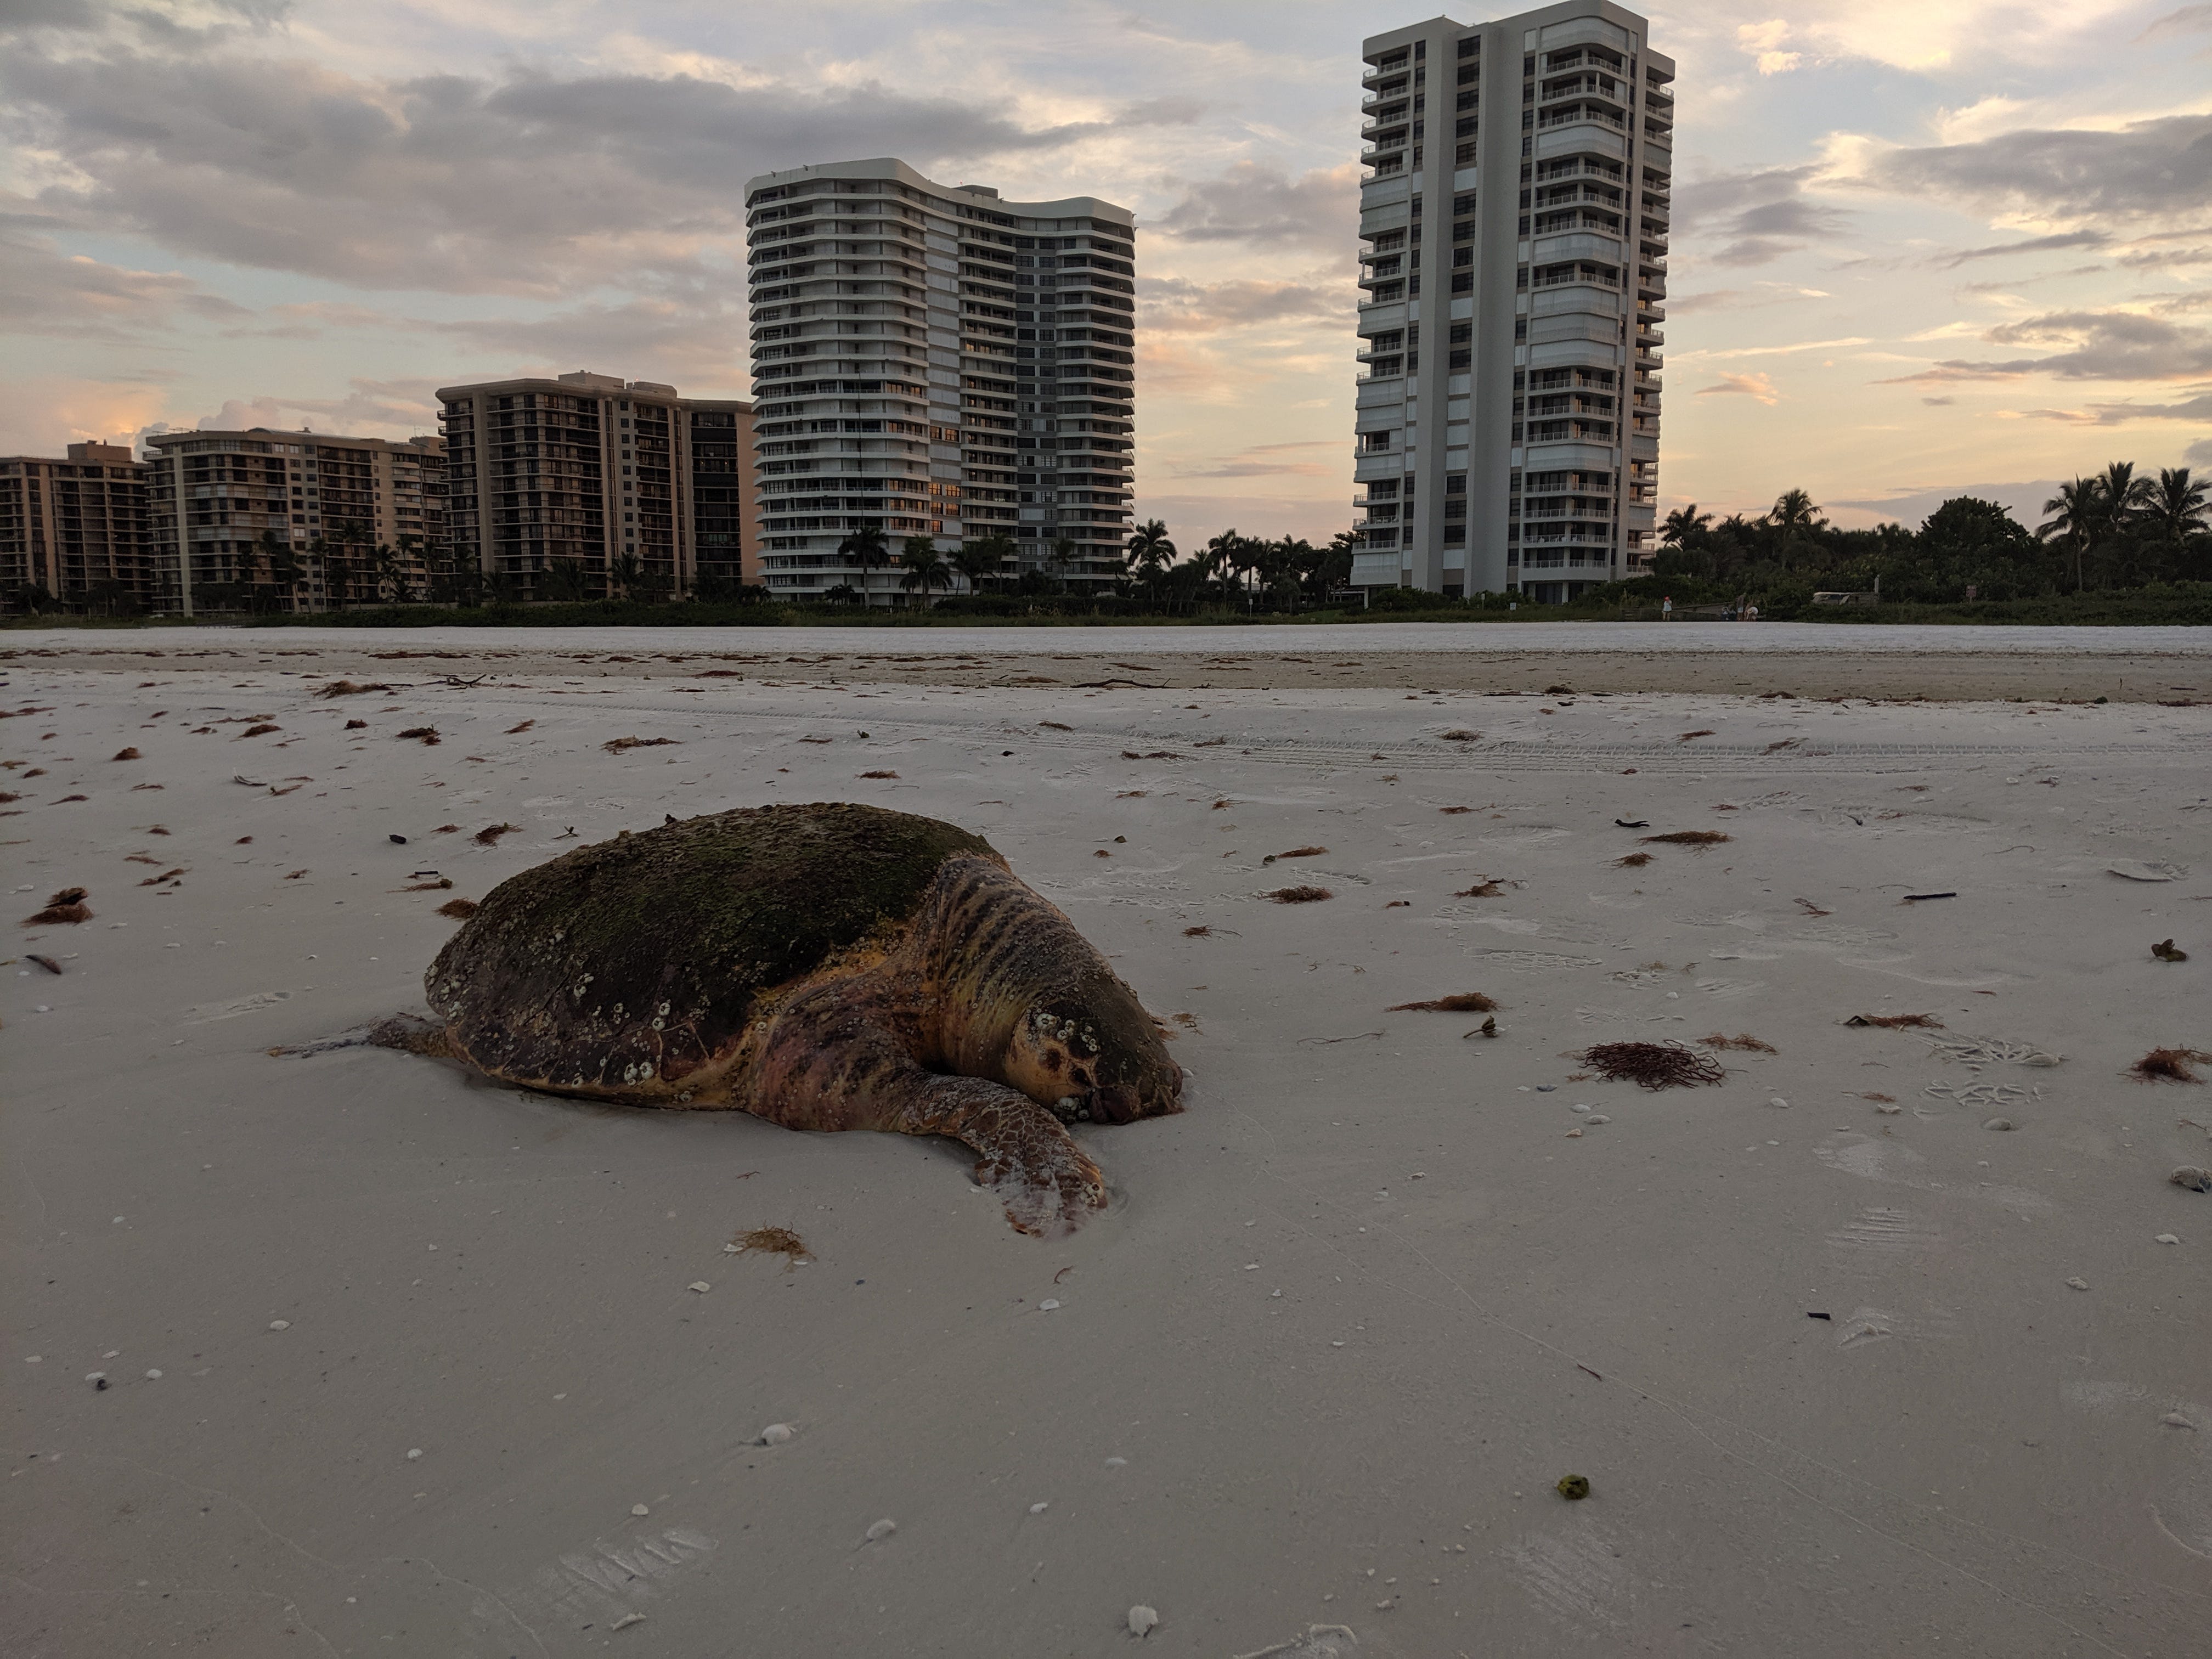 Katherine Ebaugh, a former Marco Island resident, said she saw a 200 pound dead loggerhead turtle that washed ashore behind the Madeira condominium, close to the JW Marriott Beach Resort, on the morning of Oct. 17. " It had no visible propeller marks, " Ebaugh said.